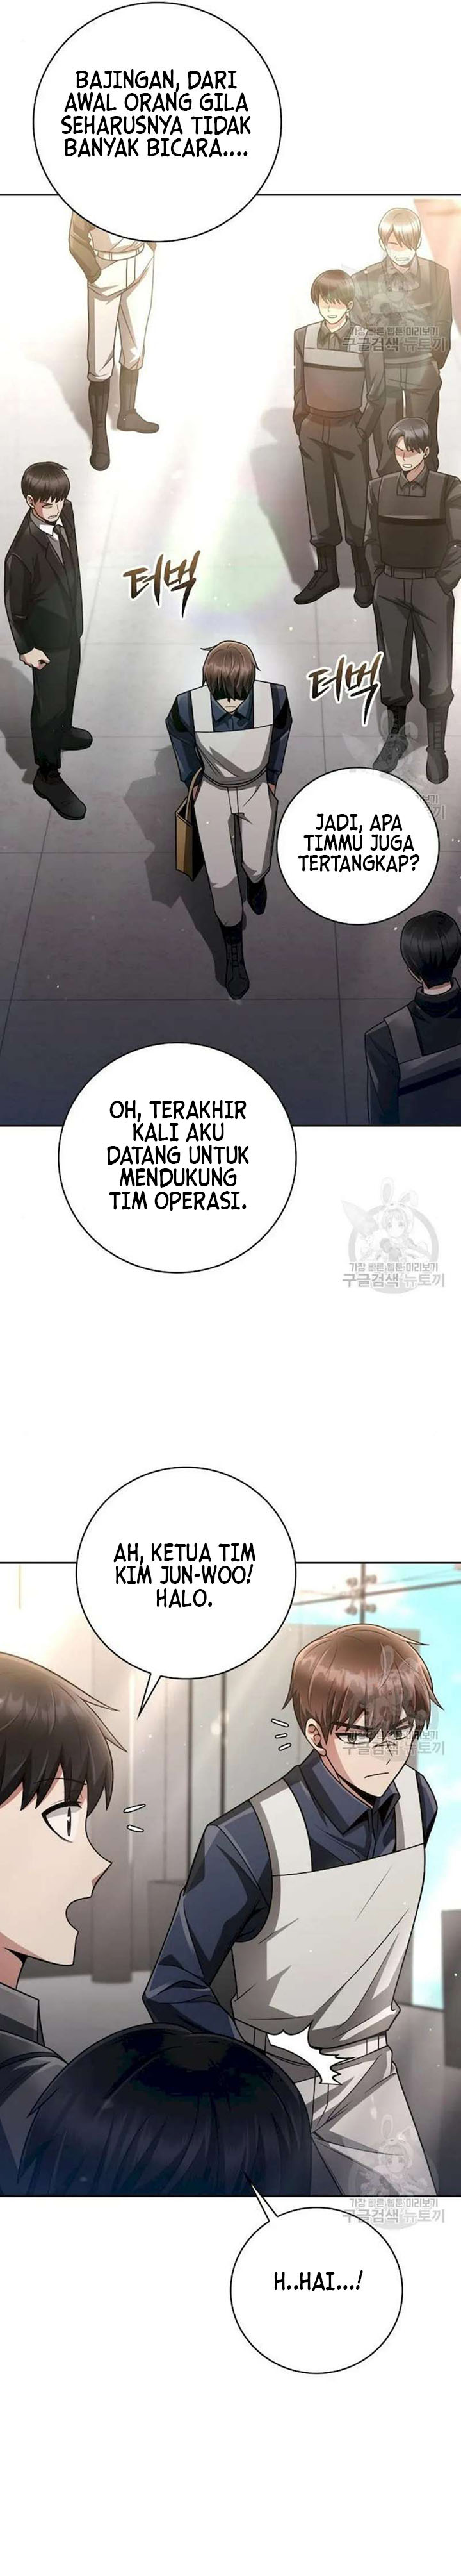 Dilarang COPAS - situs resmi www.mangacanblog.com - Komik clever cleaning life of the returned genius hunter 041 - chapter 41 42 Indonesia clever cleaning life of the returned genius hunter 041 - chapter 41 Terbaru 14|Baca Manga Komik Indonesia|Mangacan